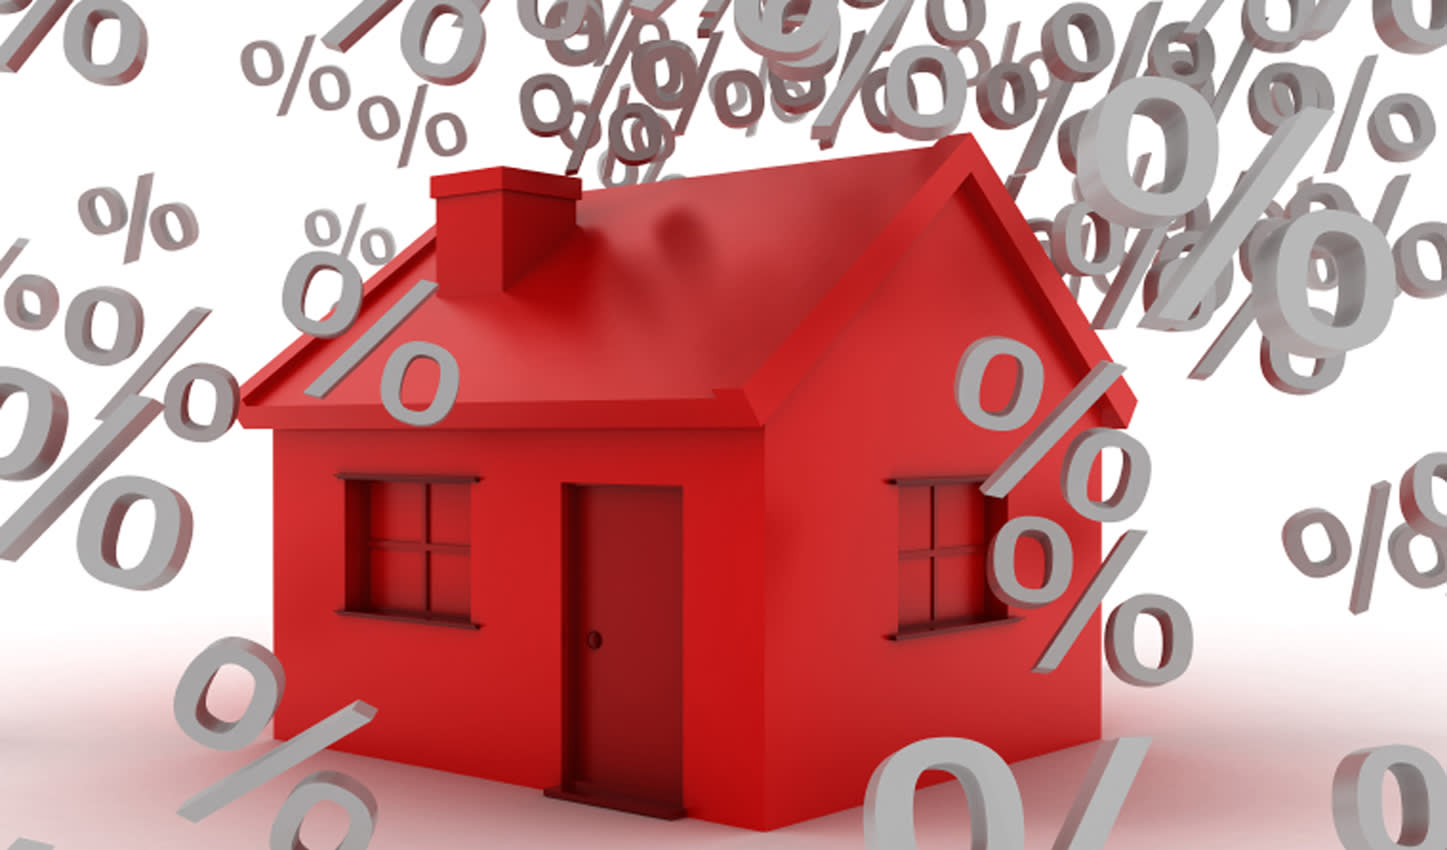 Interest-only mortgages on the up